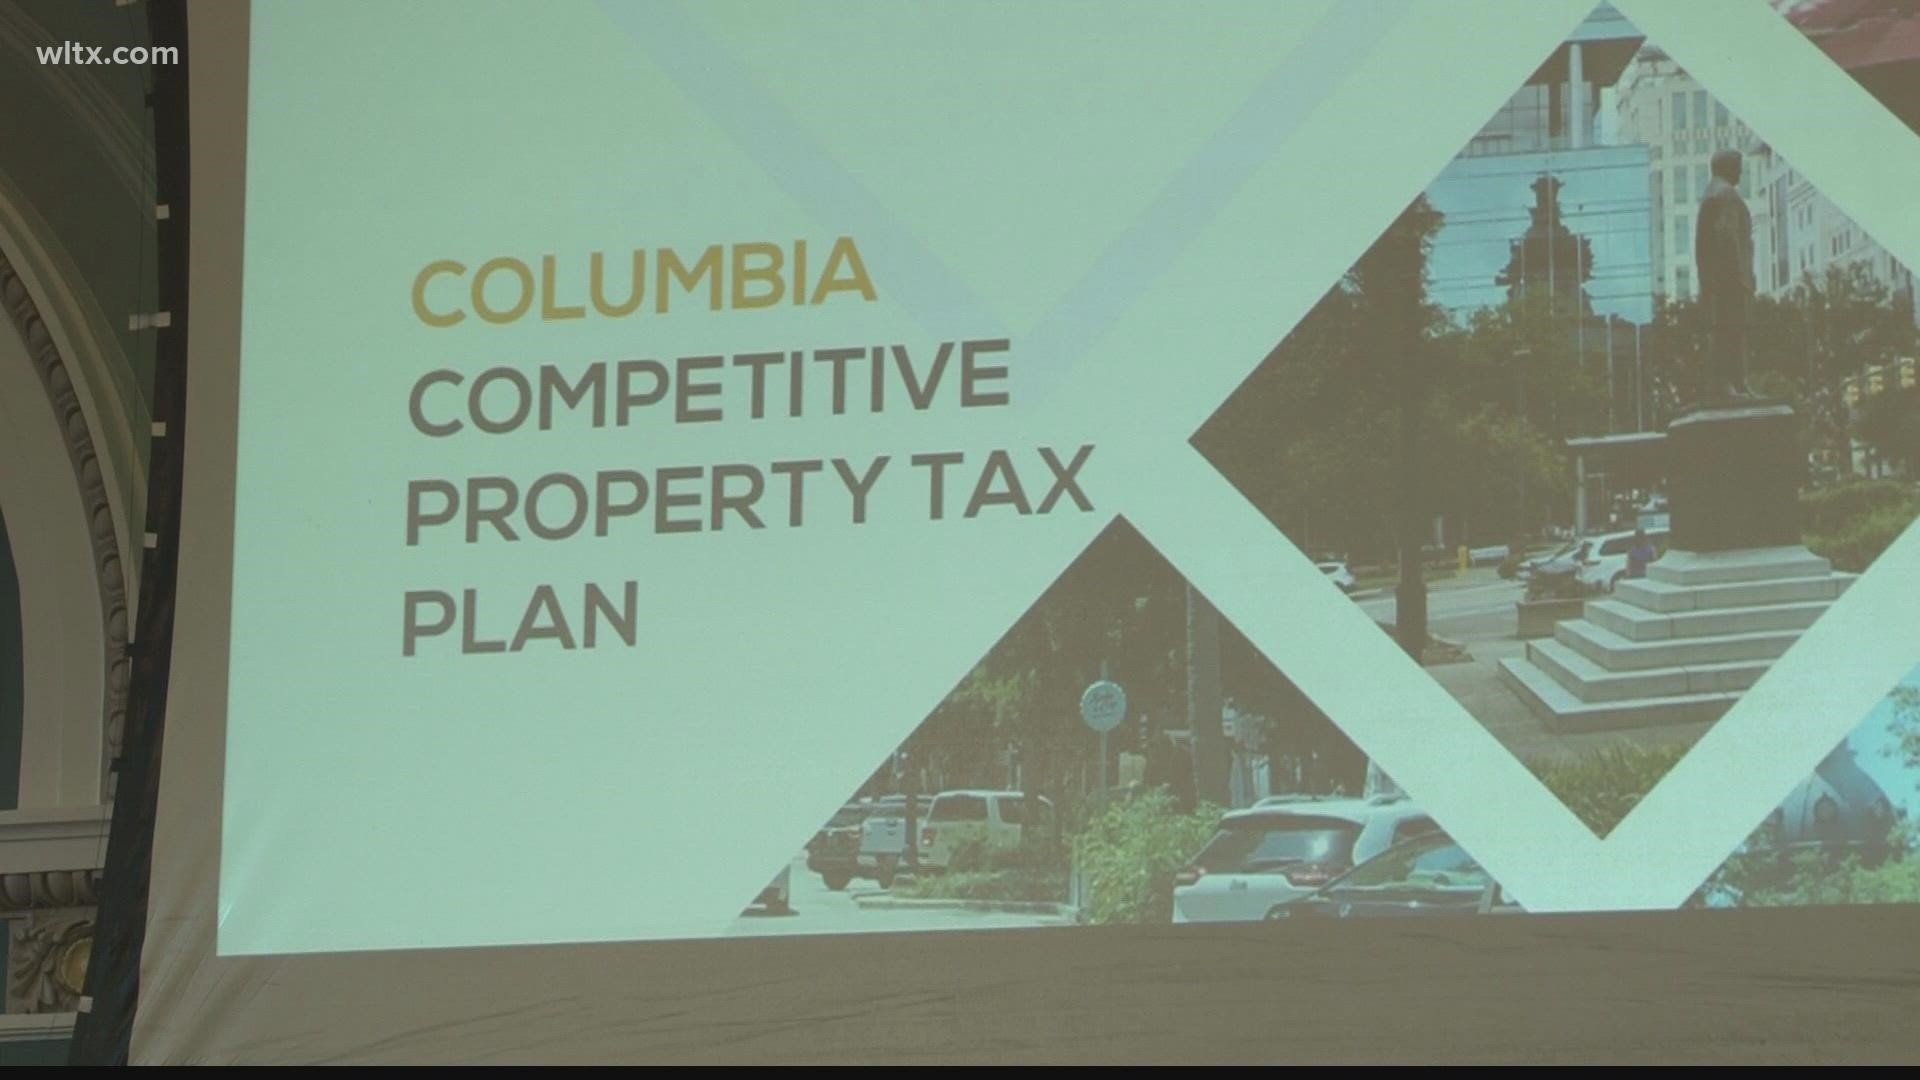 The City of Columbia's Tax Modernization Committee heard from business owners Tuesday about the impact of high commercial property tax rates.